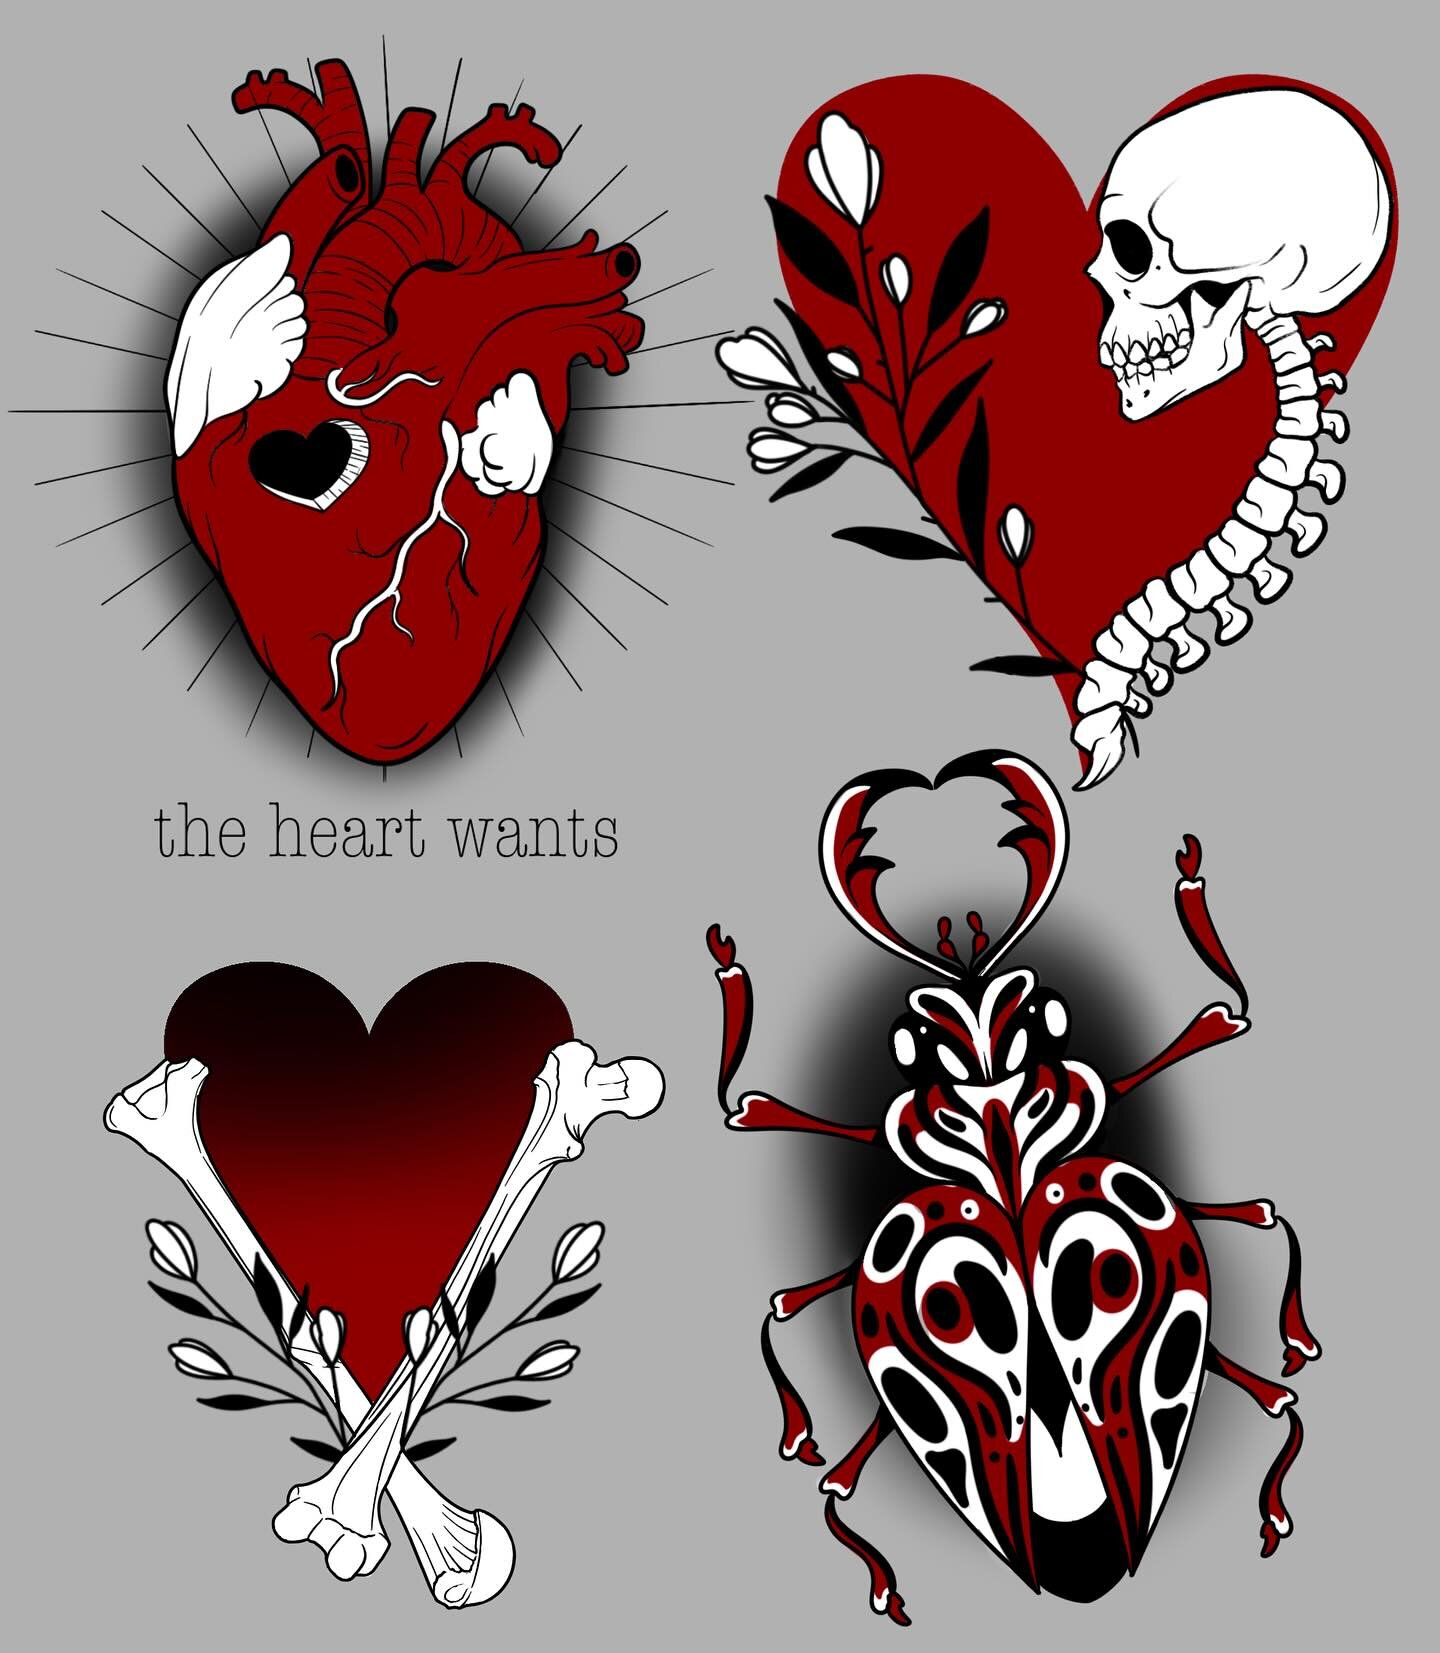 Valentines month flash! I'll be doing these guys at a discounted flat price all month. All pieces priced at hand sized flash for arms and legs. 
Skull Heart $200
Bones heart $150
Love Bug $150
Heart Wants $200